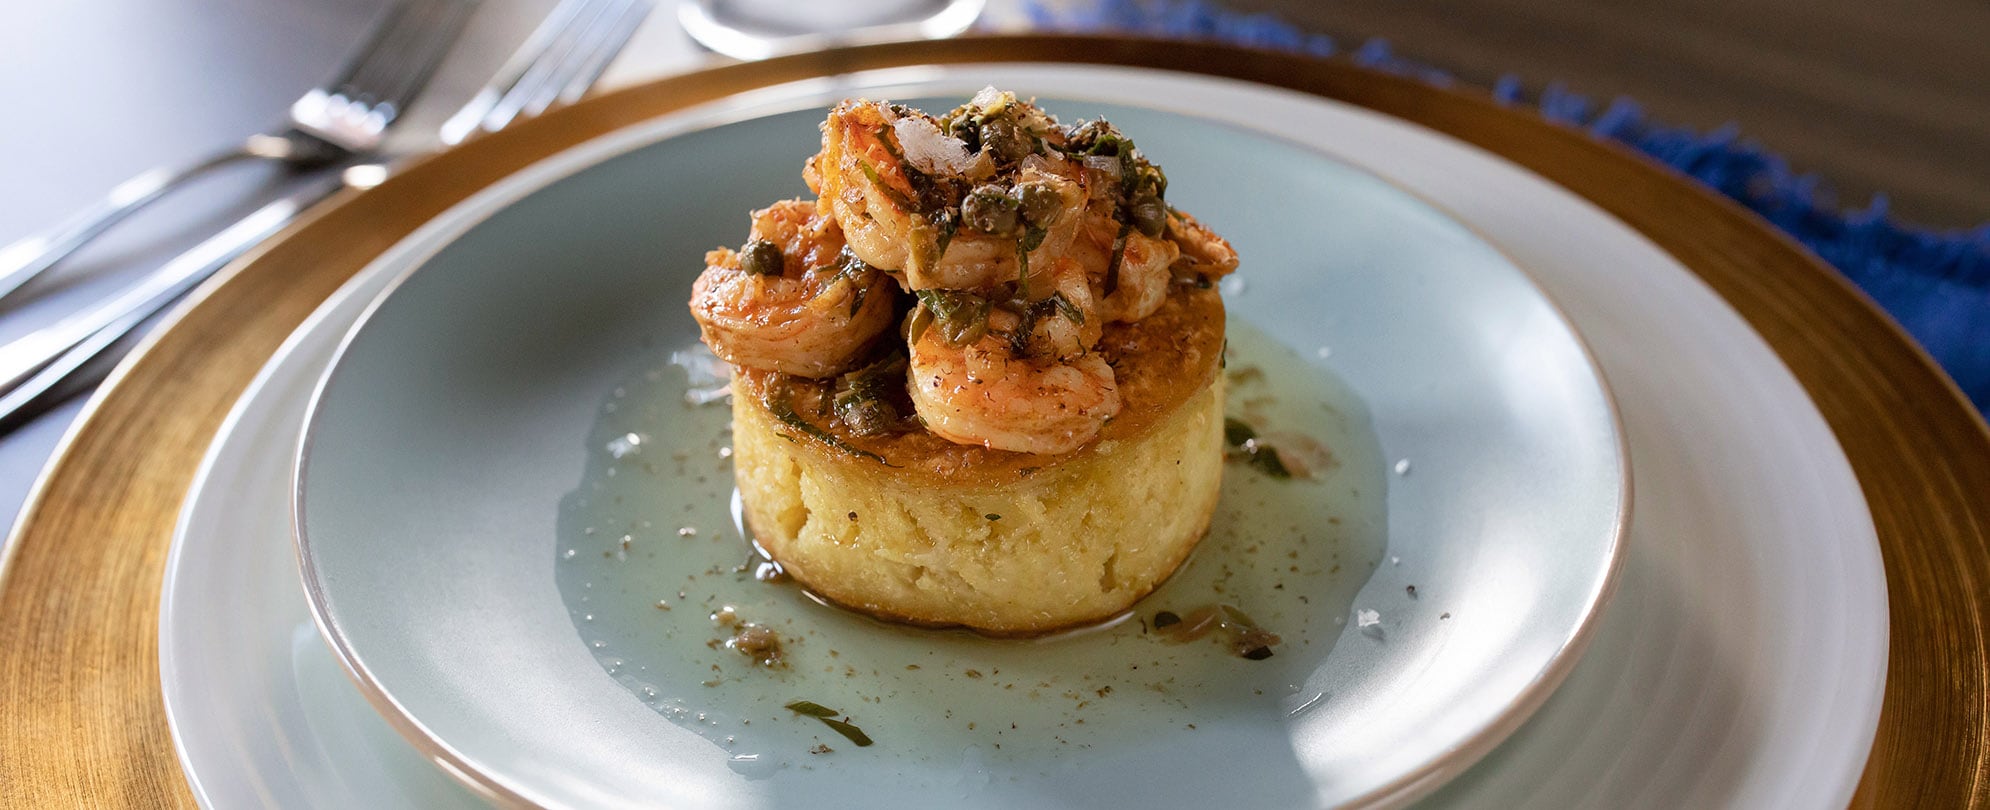 A plated meal with shrimp from a Club Wyndham private chef.